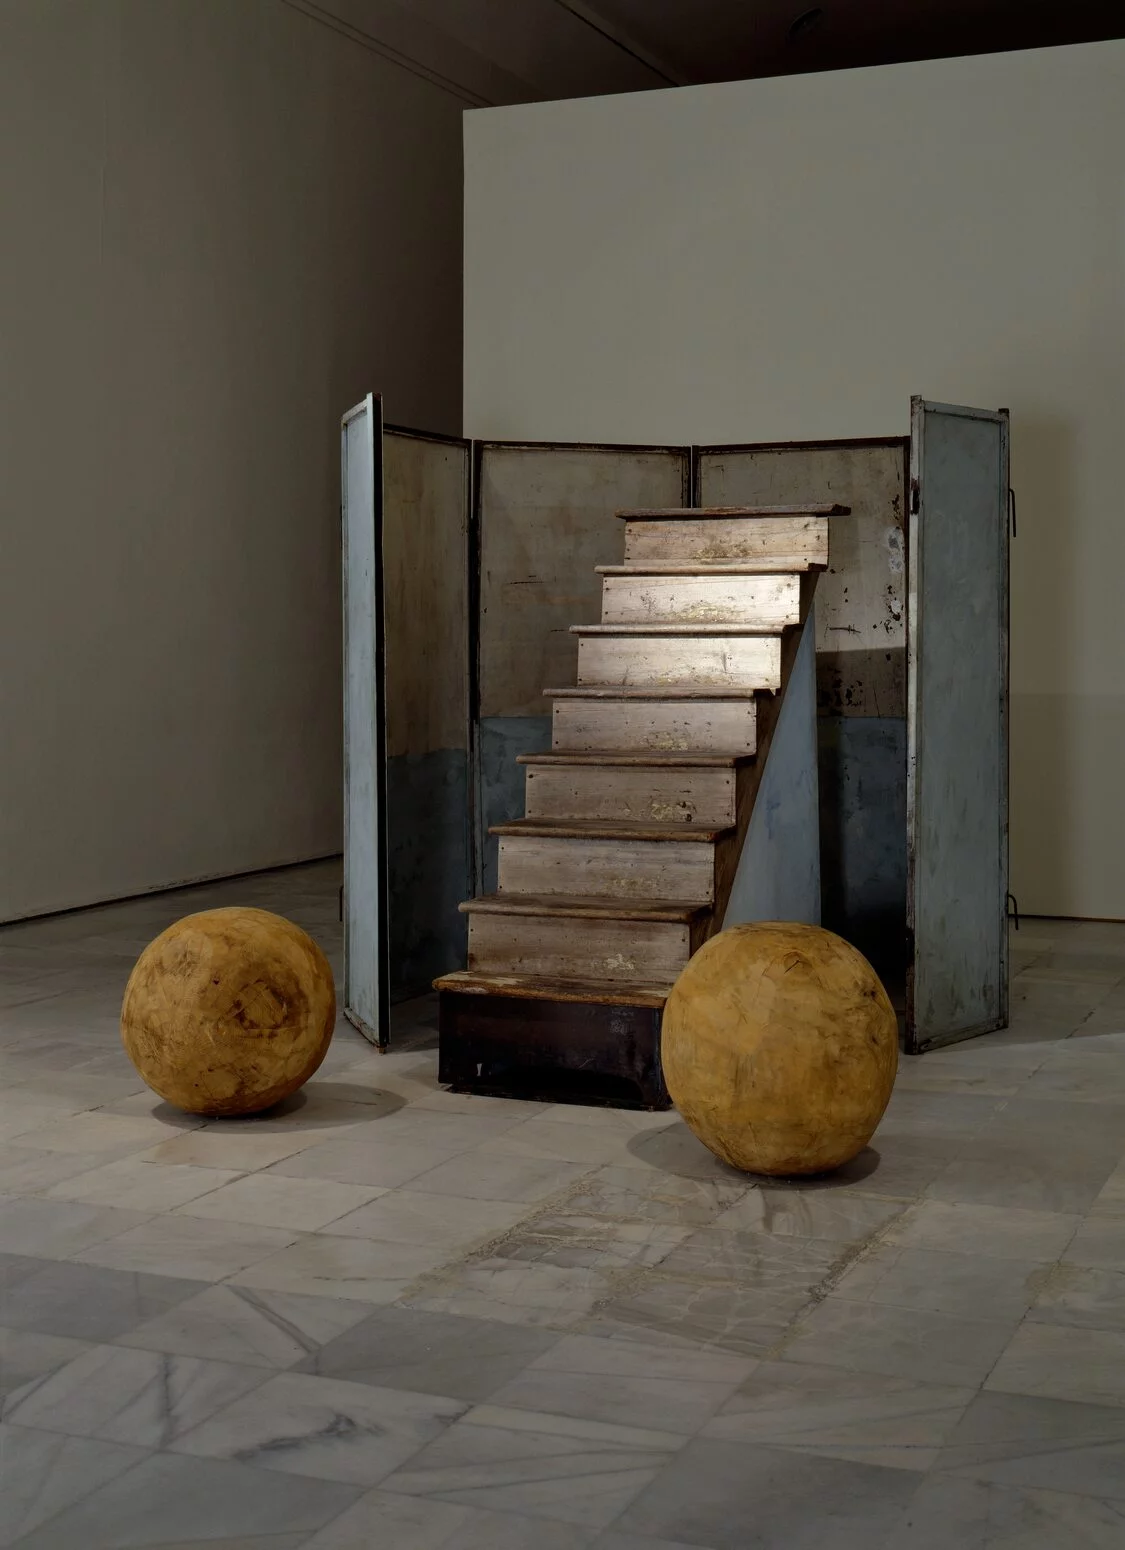 Villa Medici presents two works by Louise Bourgeois